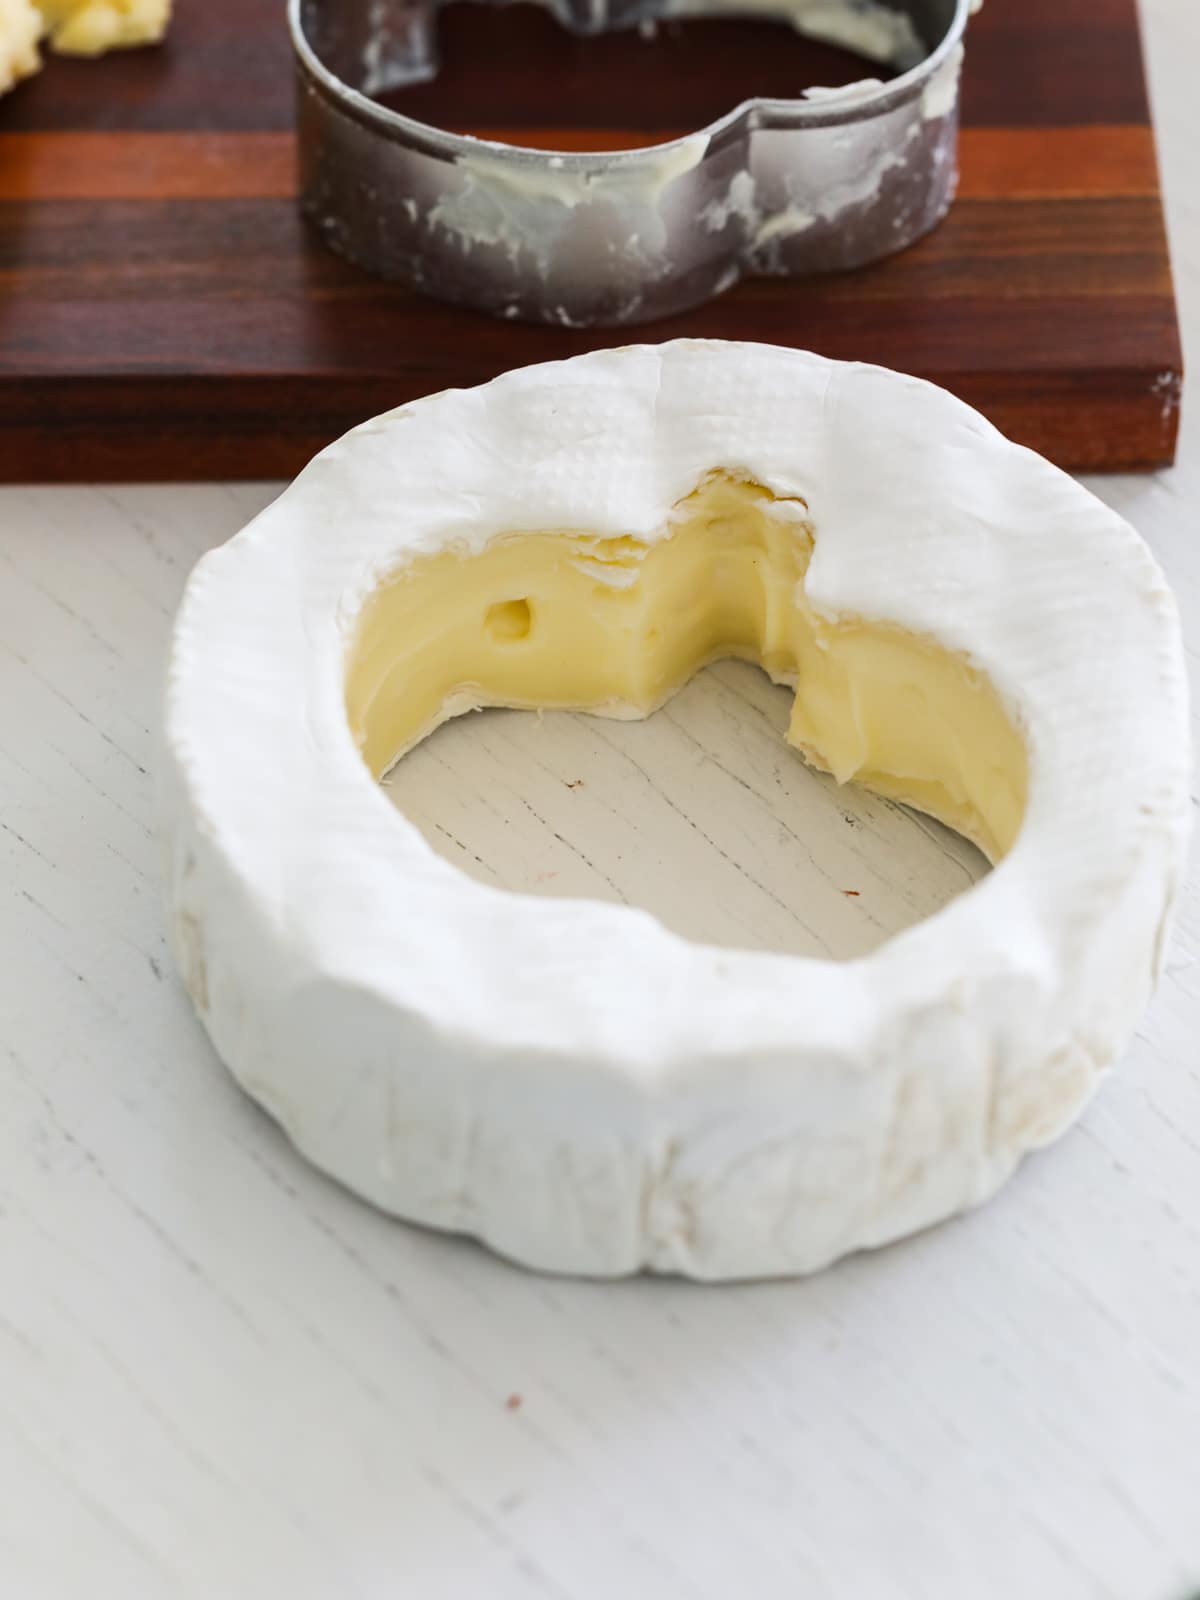 A pumpkin shape cut out of a wheel of brie for a charcuterie board.